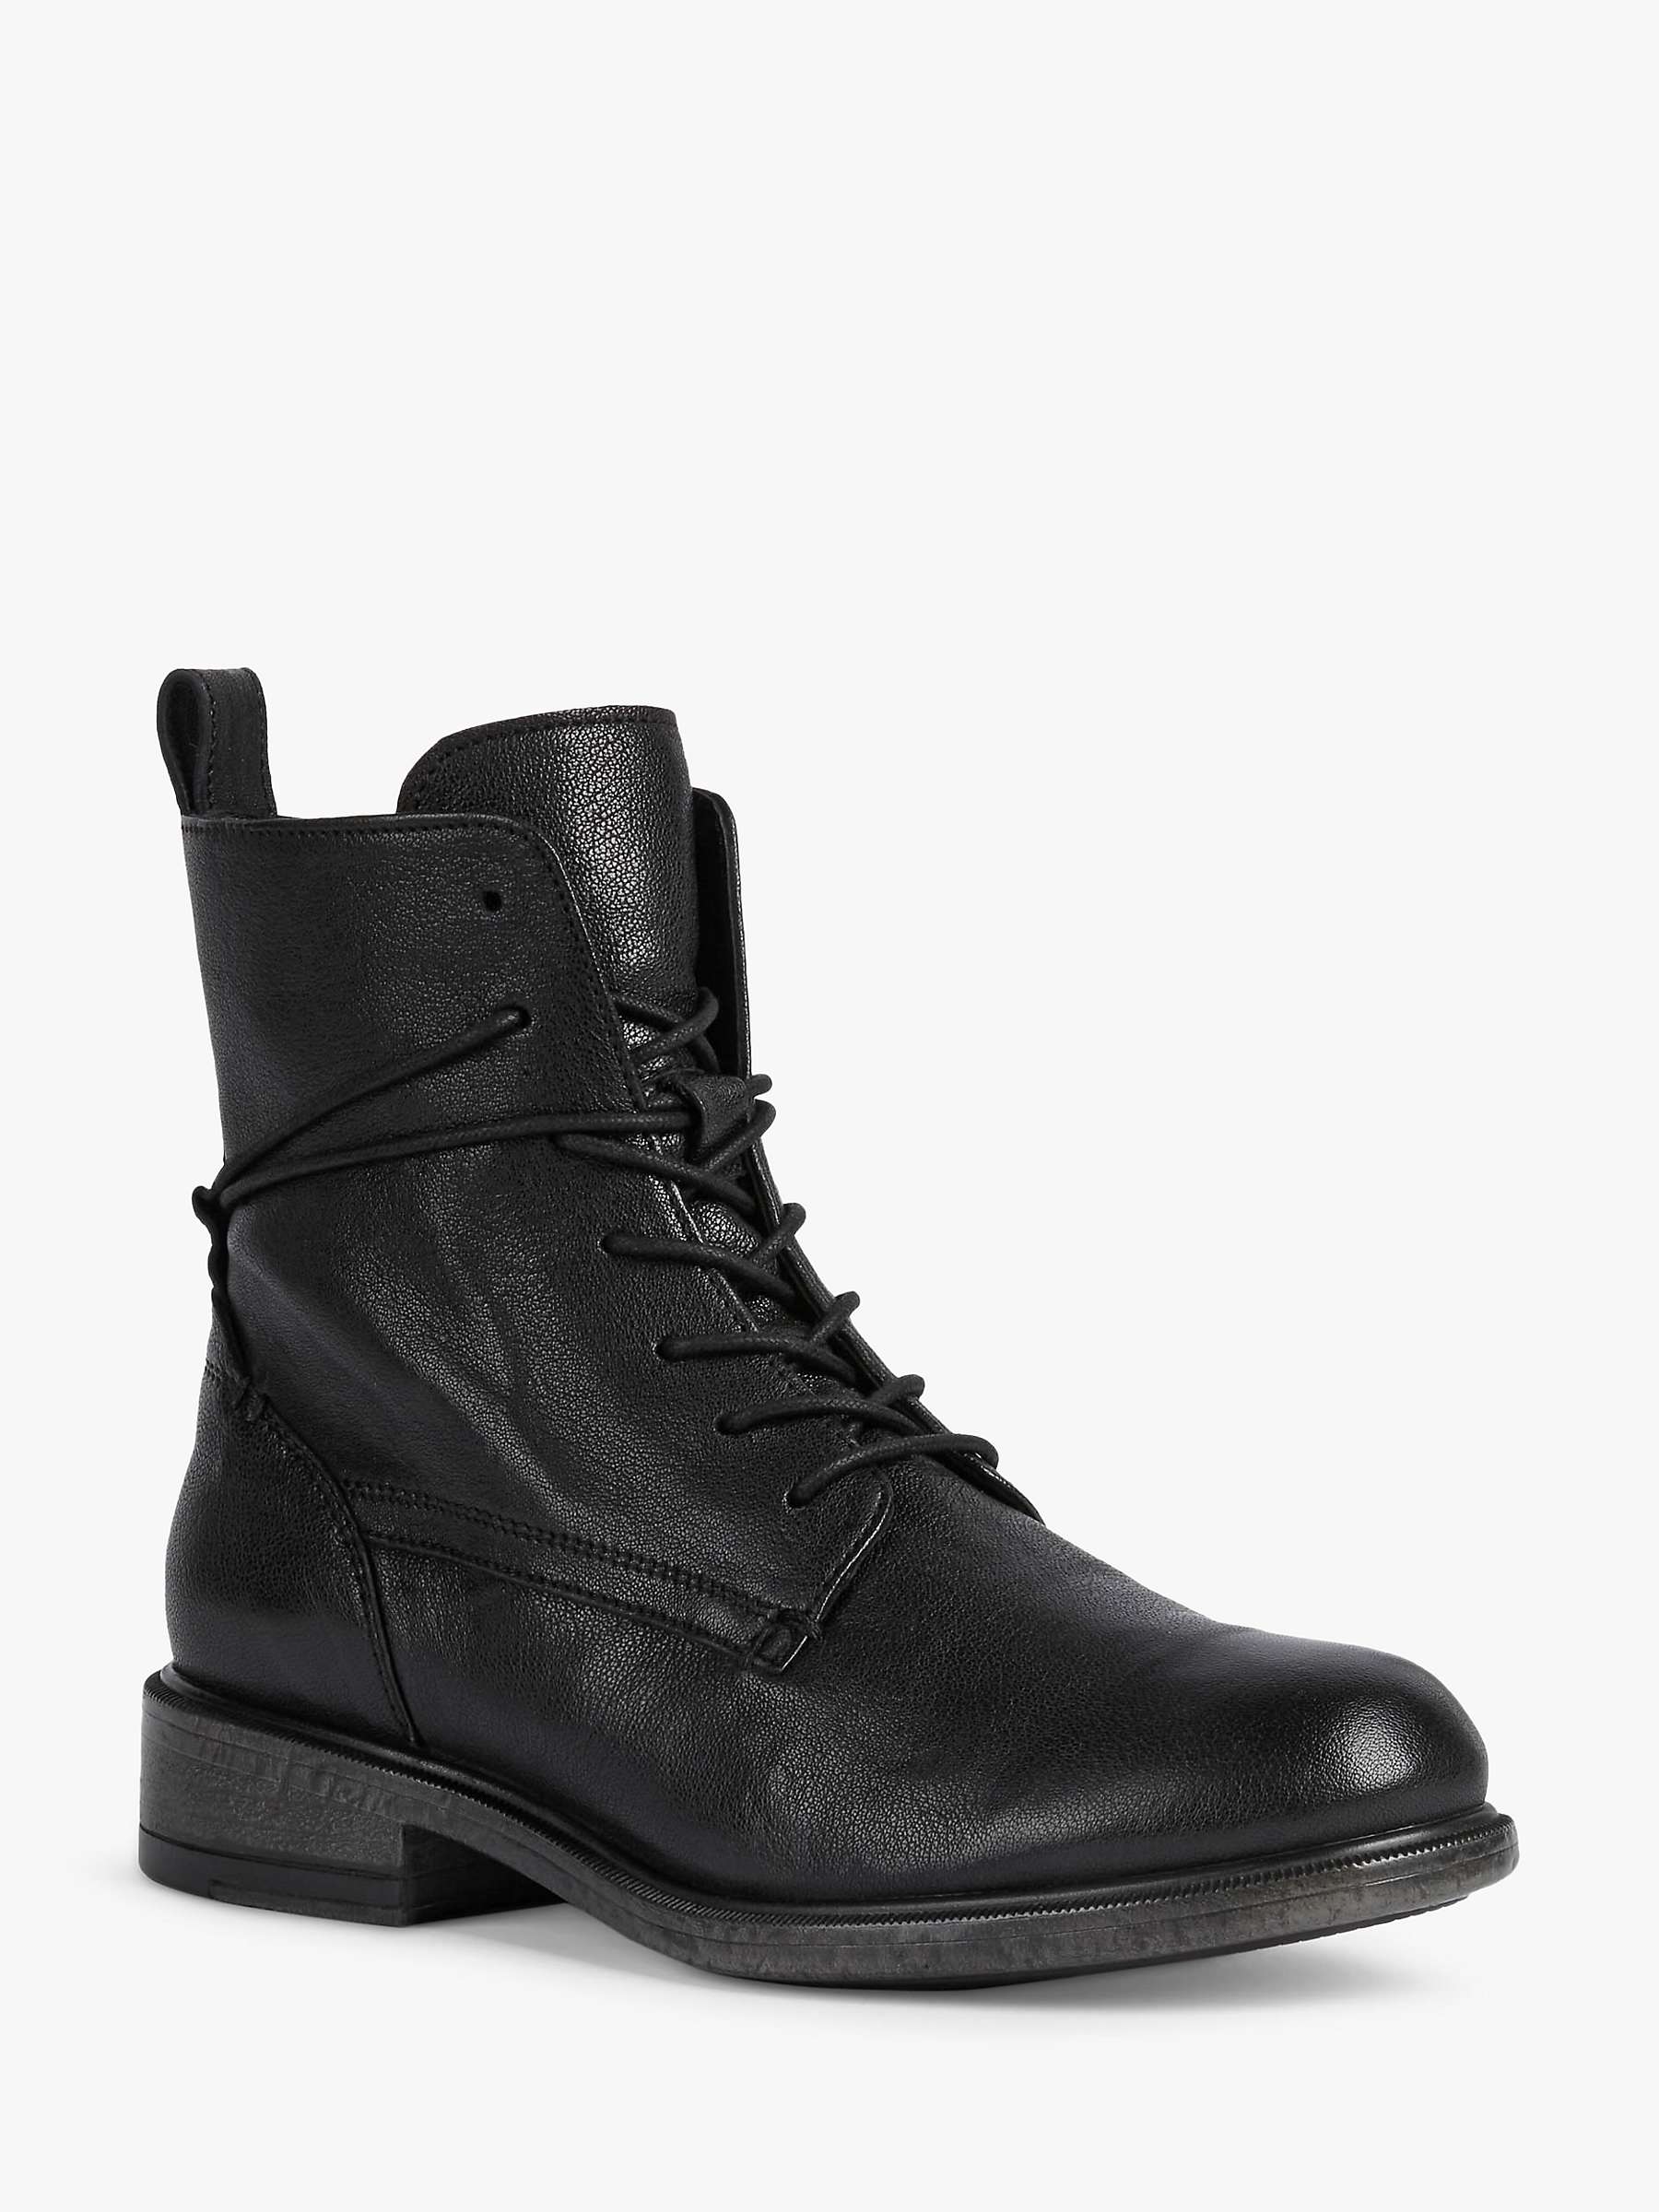 Buy Geox Catria Leather Lace Up Ankle Boots Online at johnlewis.com